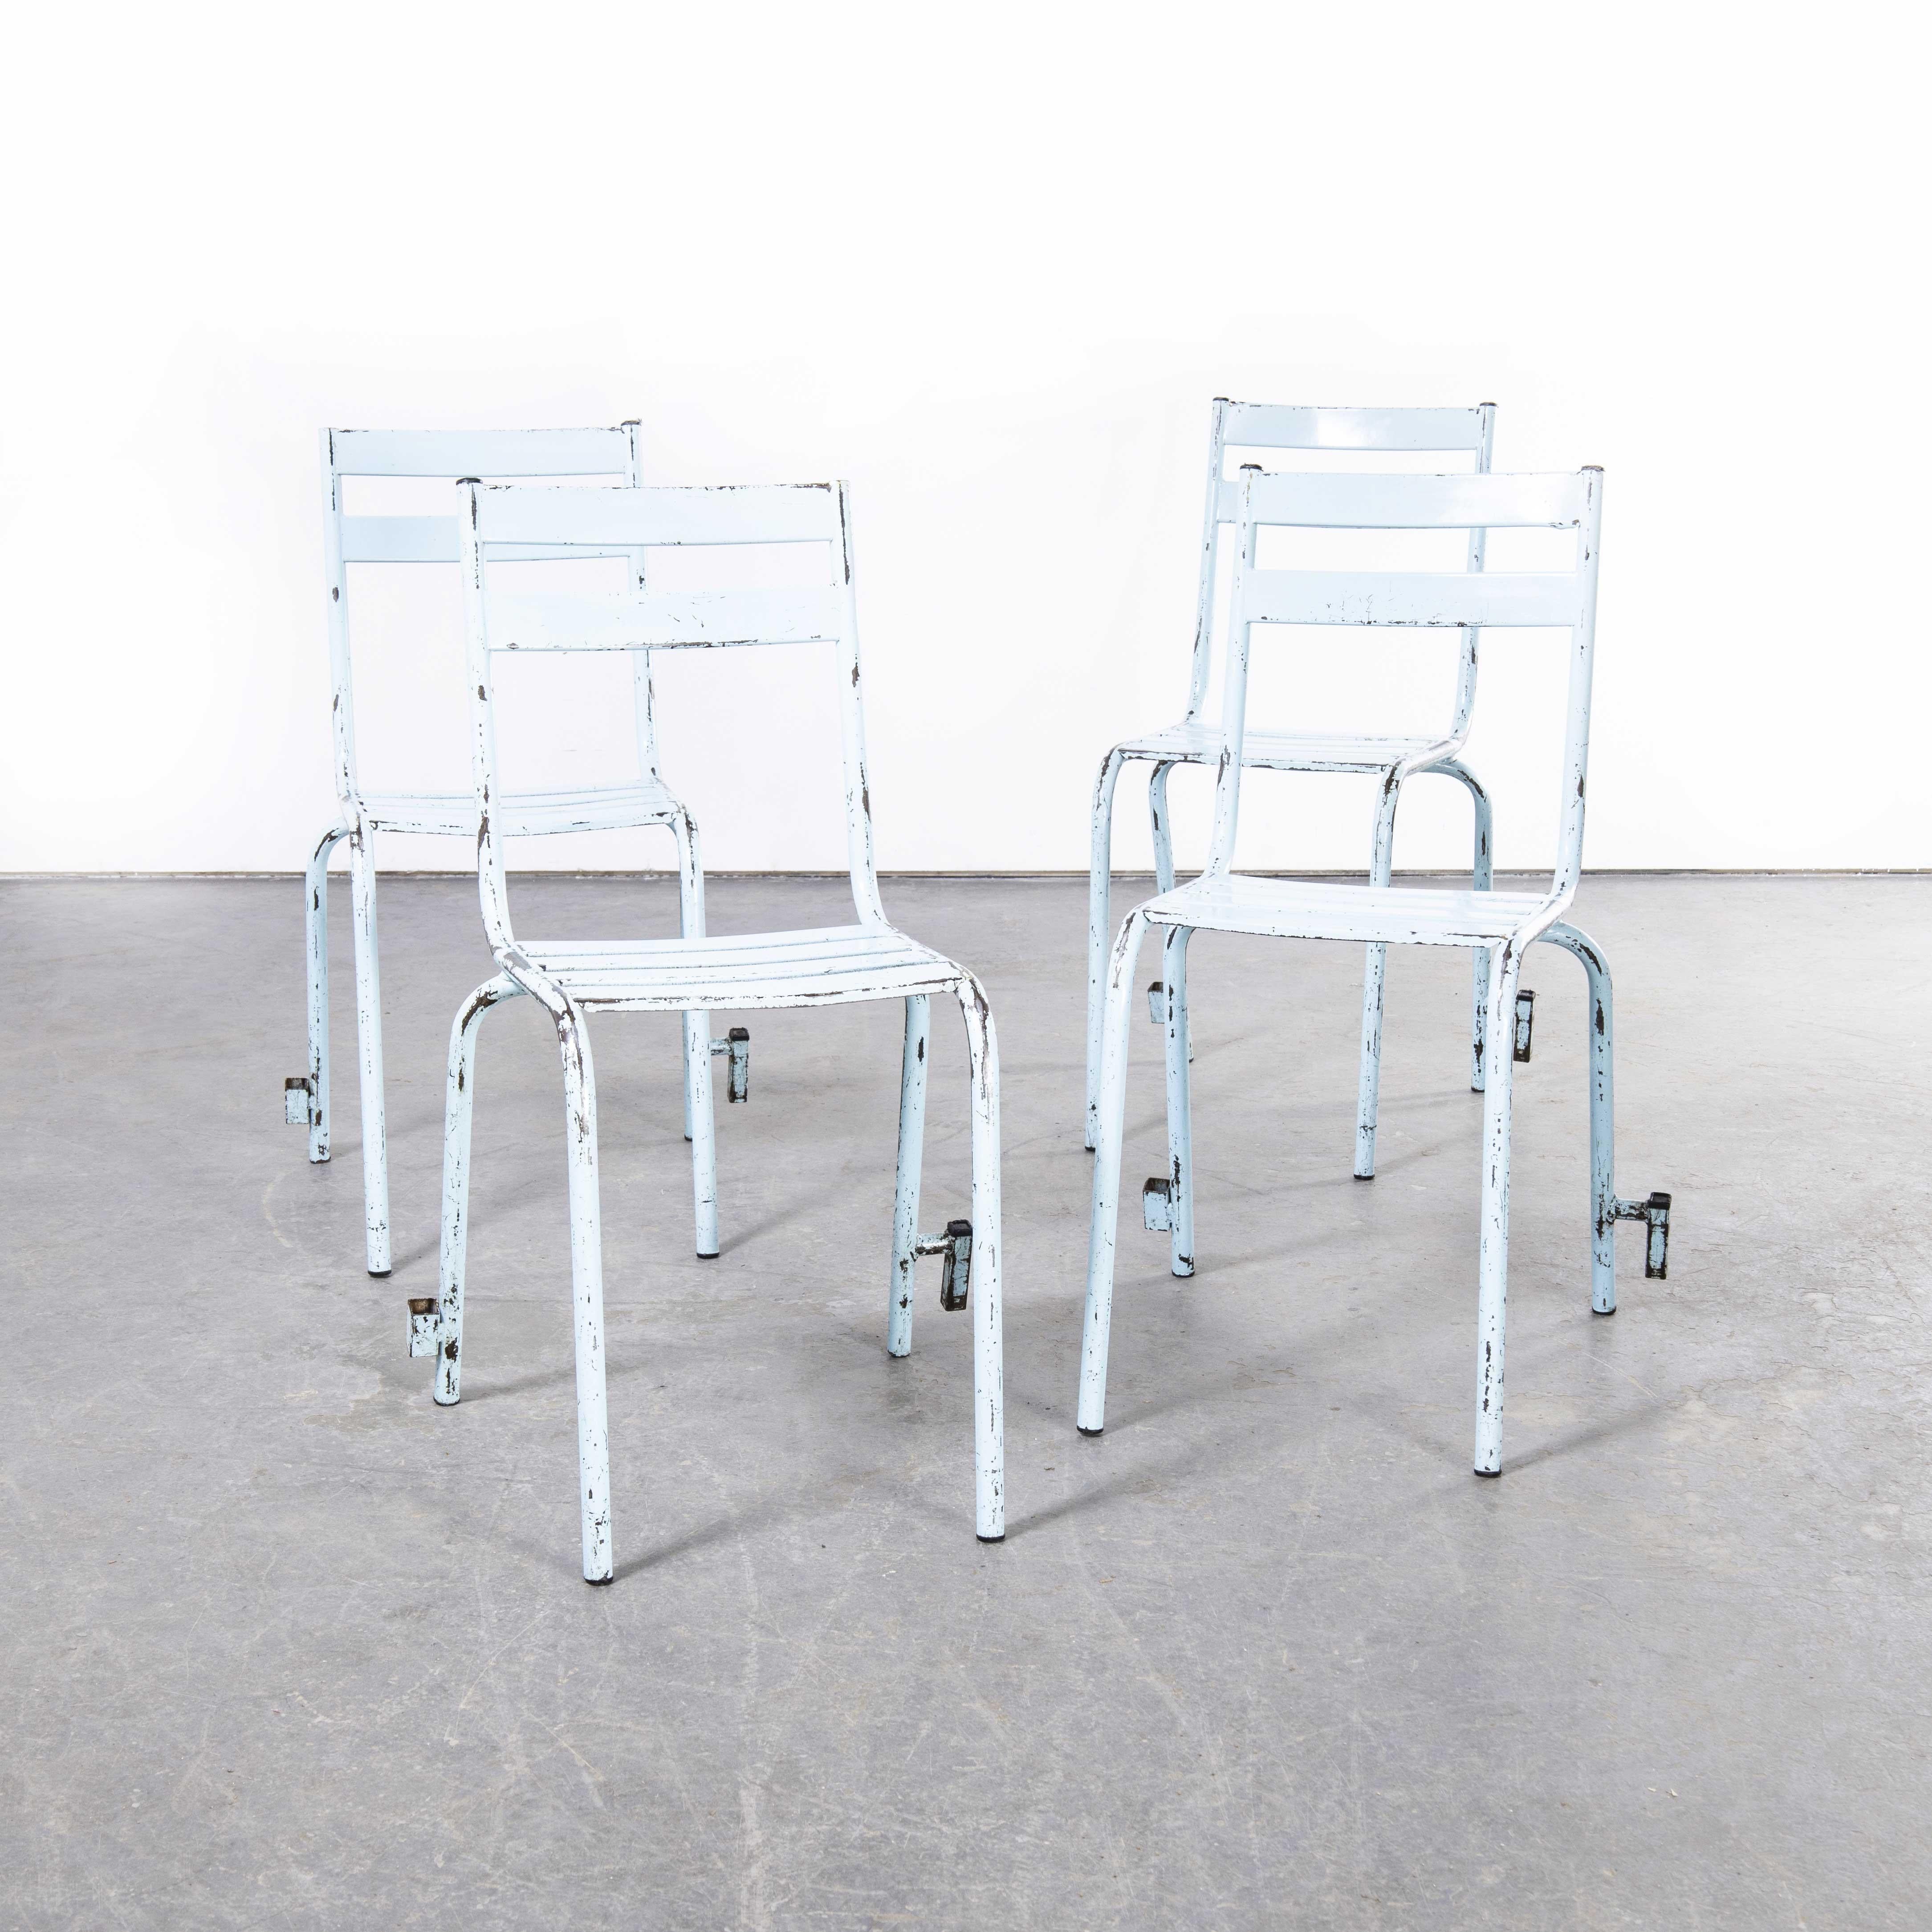 1950s french artprog sky blue metal stacking outdoor chairs – set of four
1950s french artprog sky blue metal stacking outdoor chairs – set of four. Reminiscent of tolix but not made by tolix, artprog was a producer in gray in haute saone. Sometimes